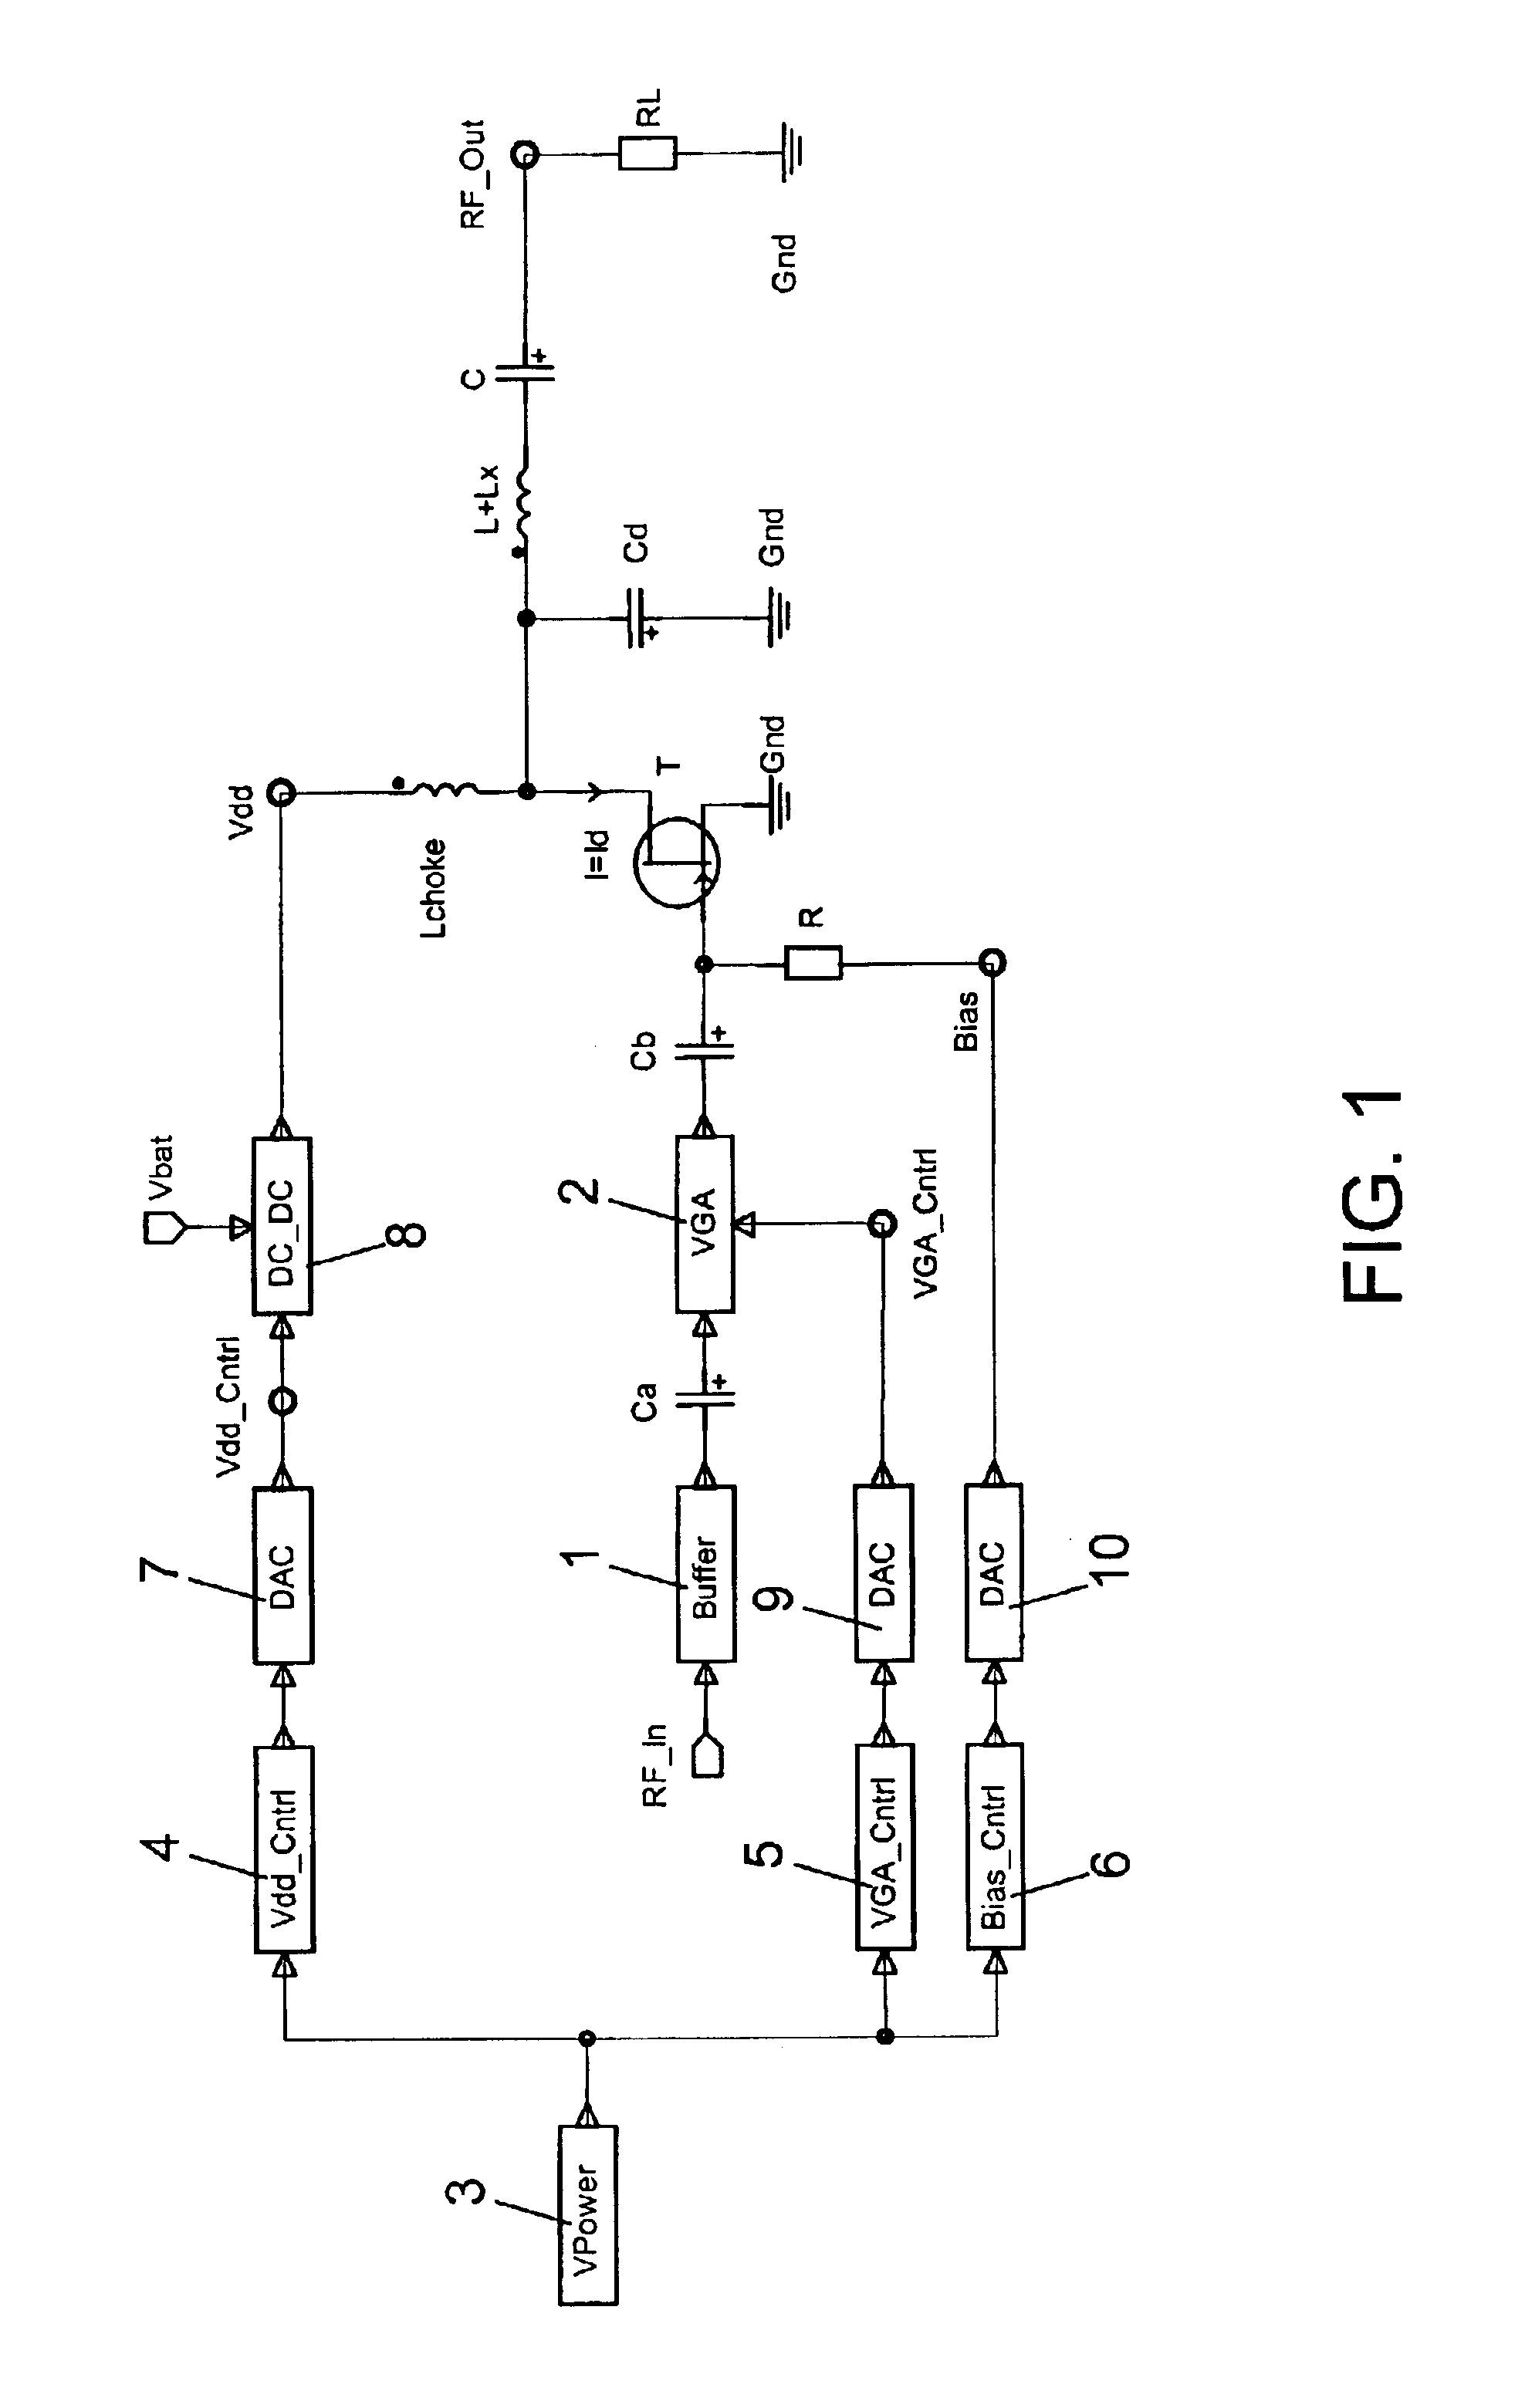 Power control for a switching mode power amplifier